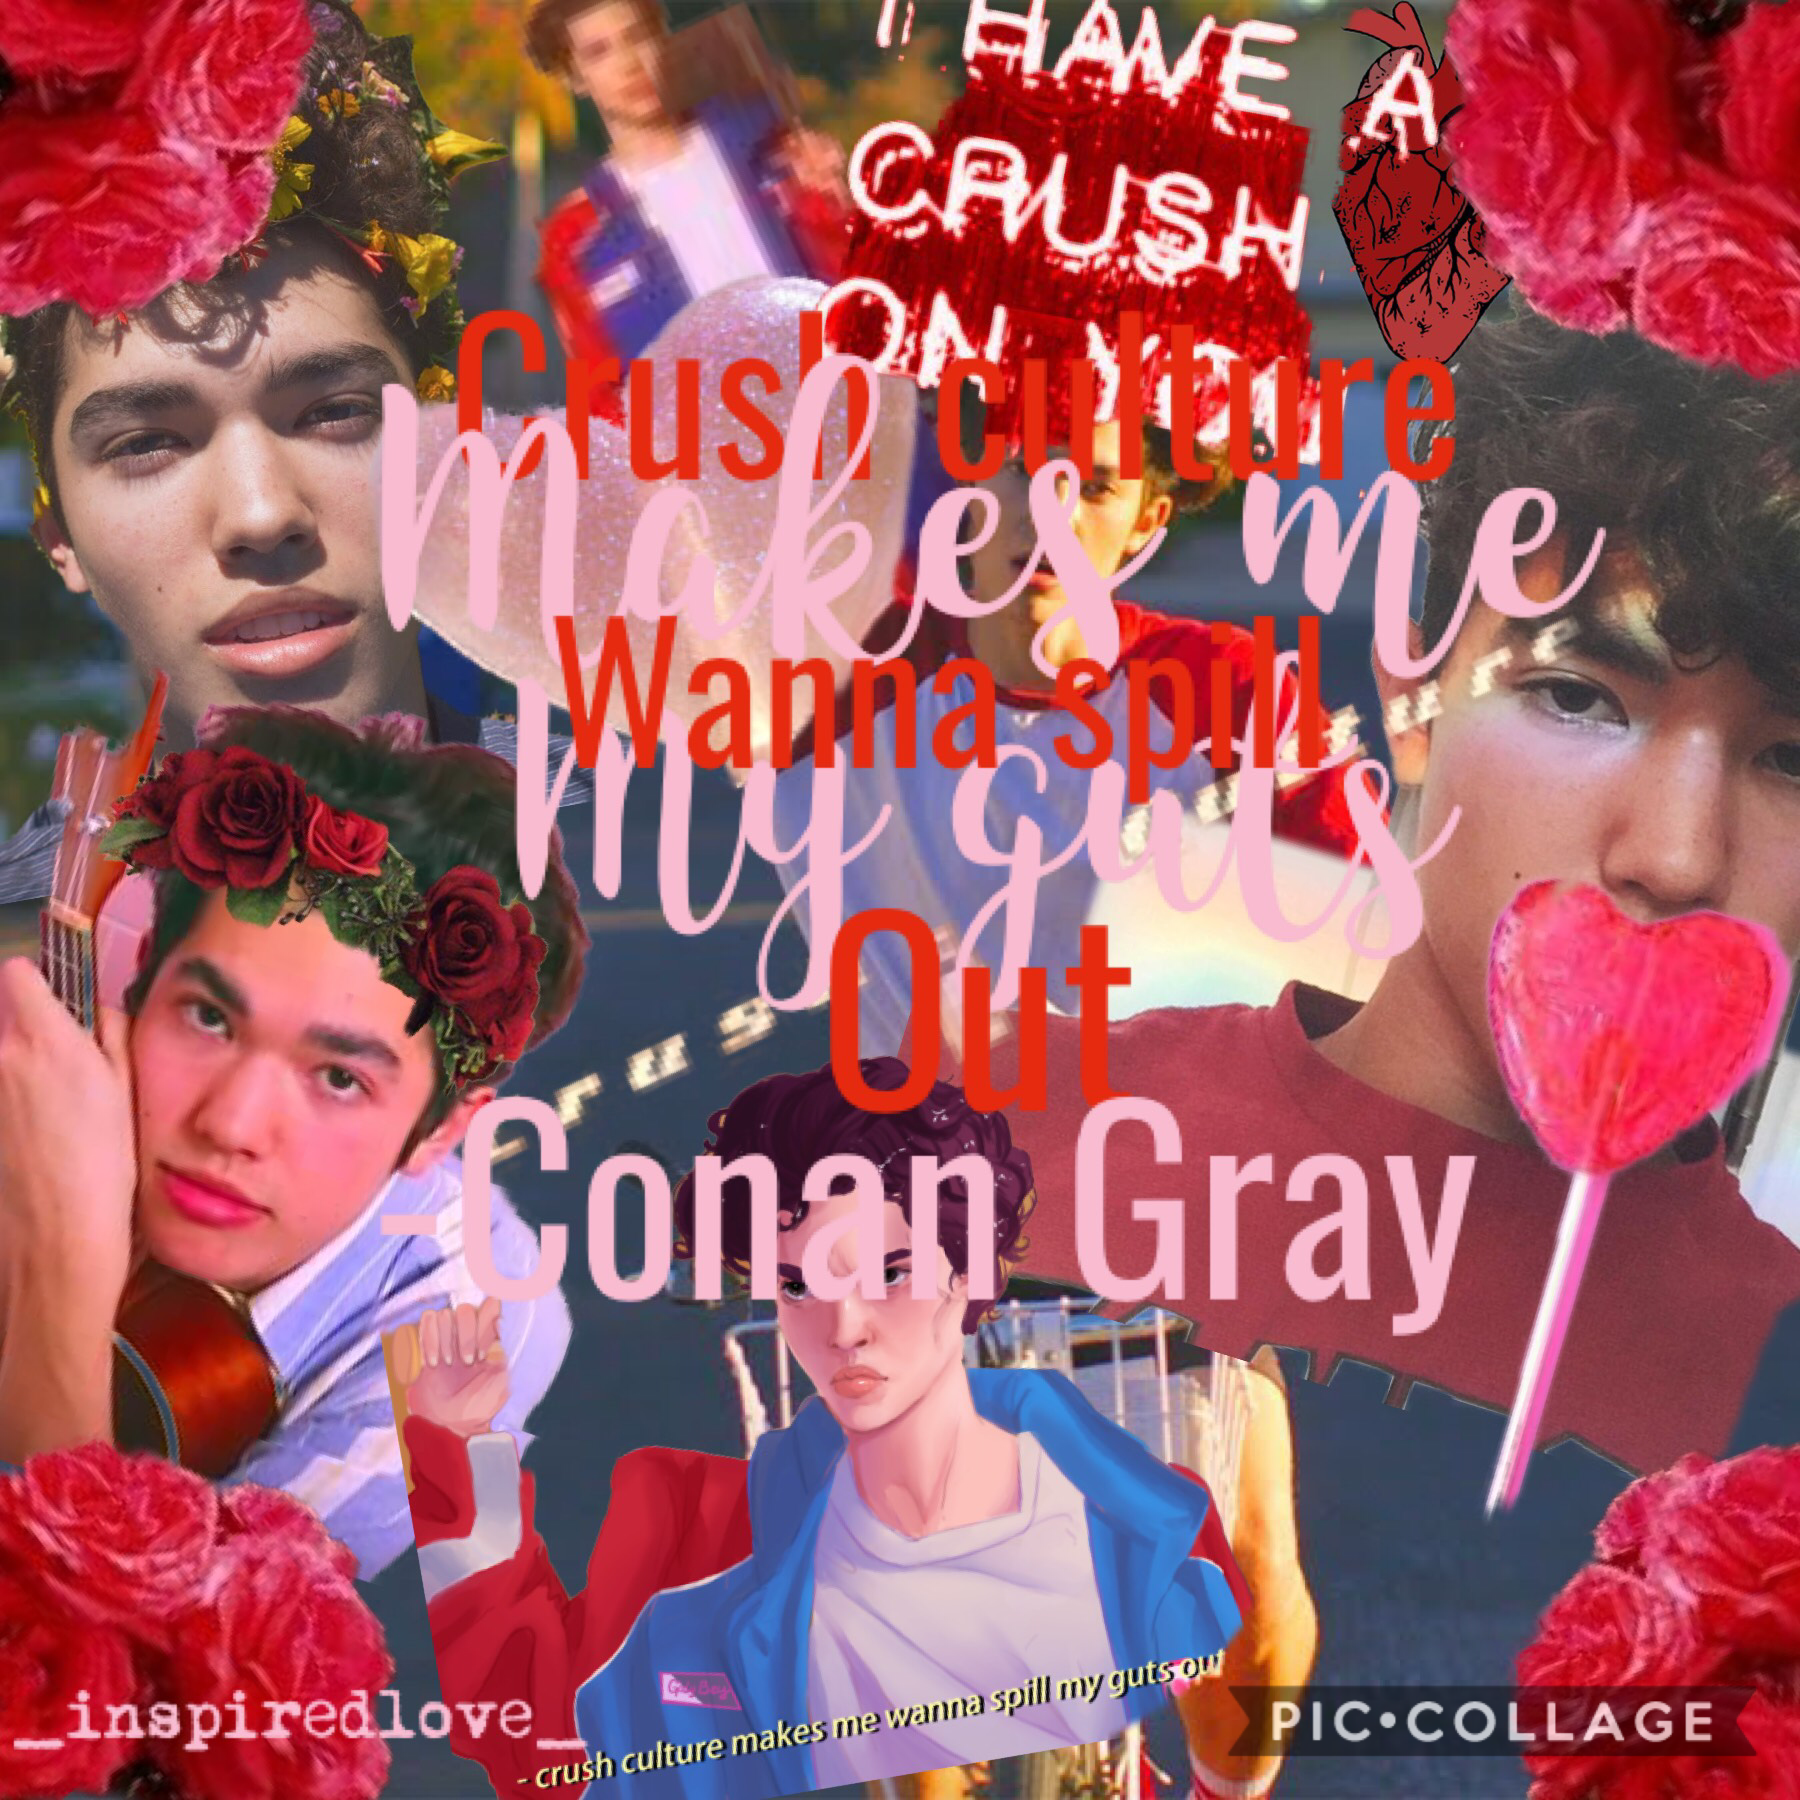 I am absolutely in love with this new song called “Crush Culture” by Conan Gray... it’s great. I would recommend you listen to it. Anyways, have a good day/night💖